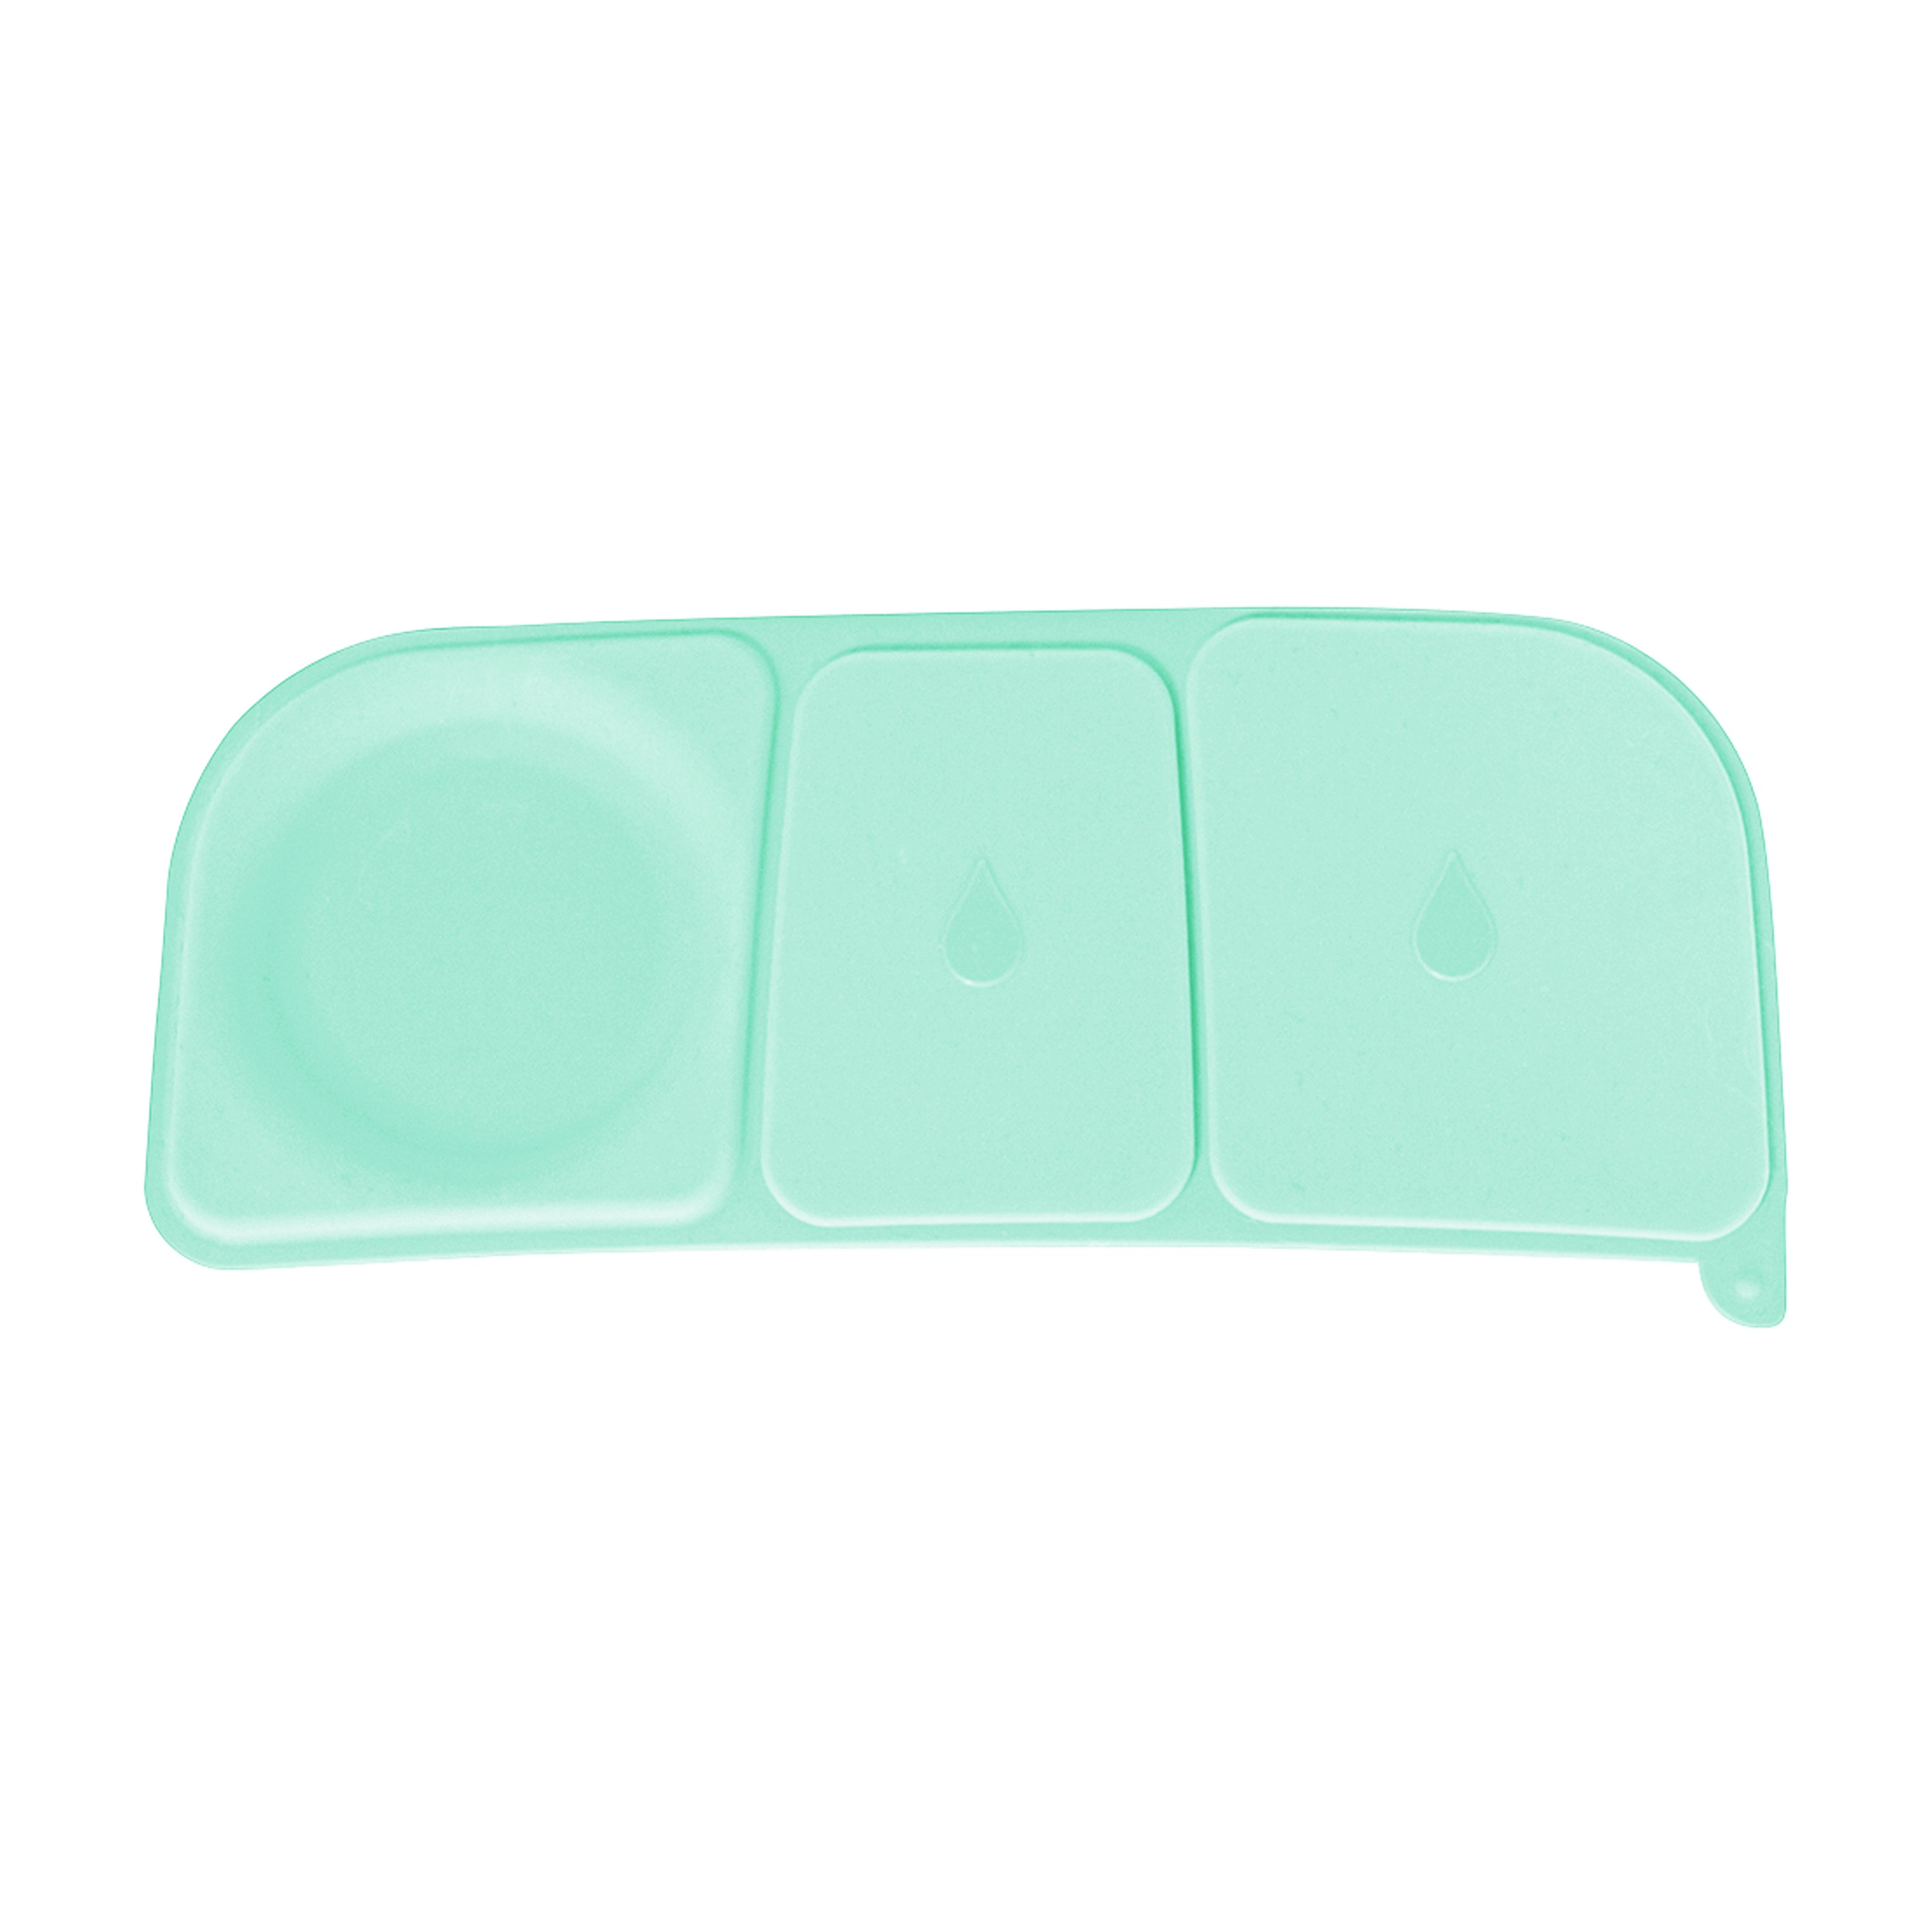 b.box Replacement Large Lunchbox Seal